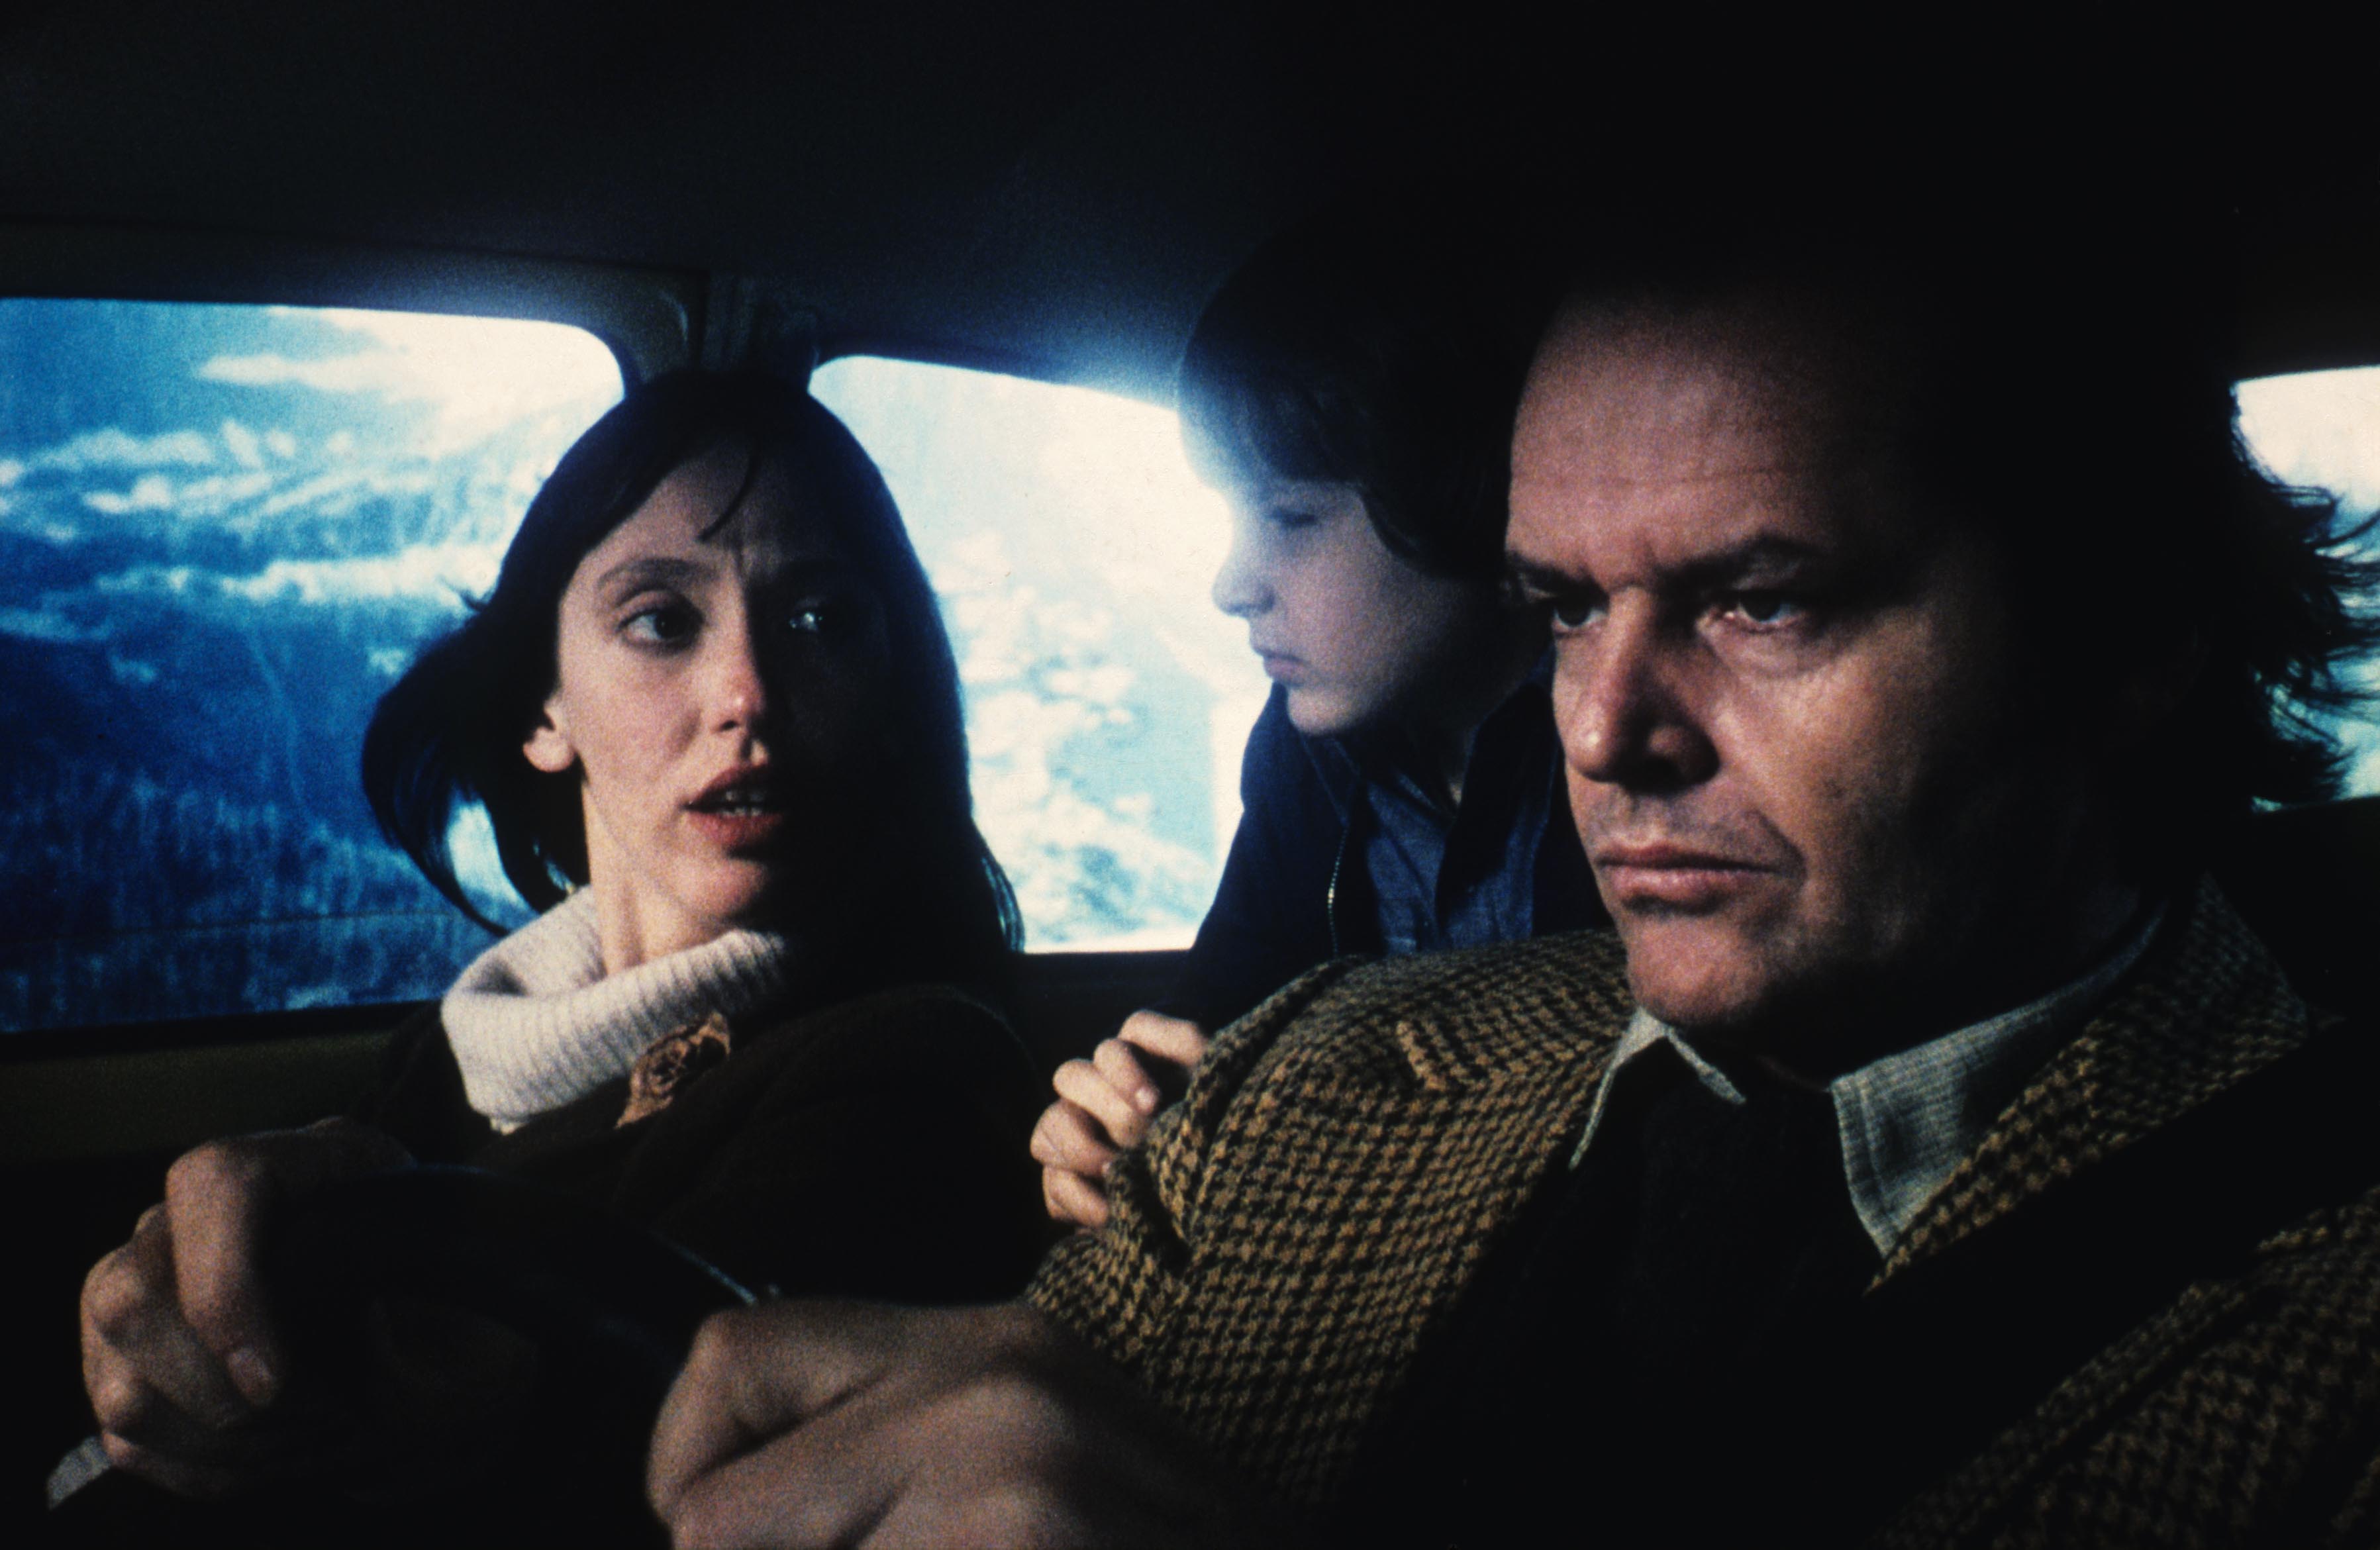 Shelley said she cried for 12 hours a day filming The Shining with Jack Nicholson